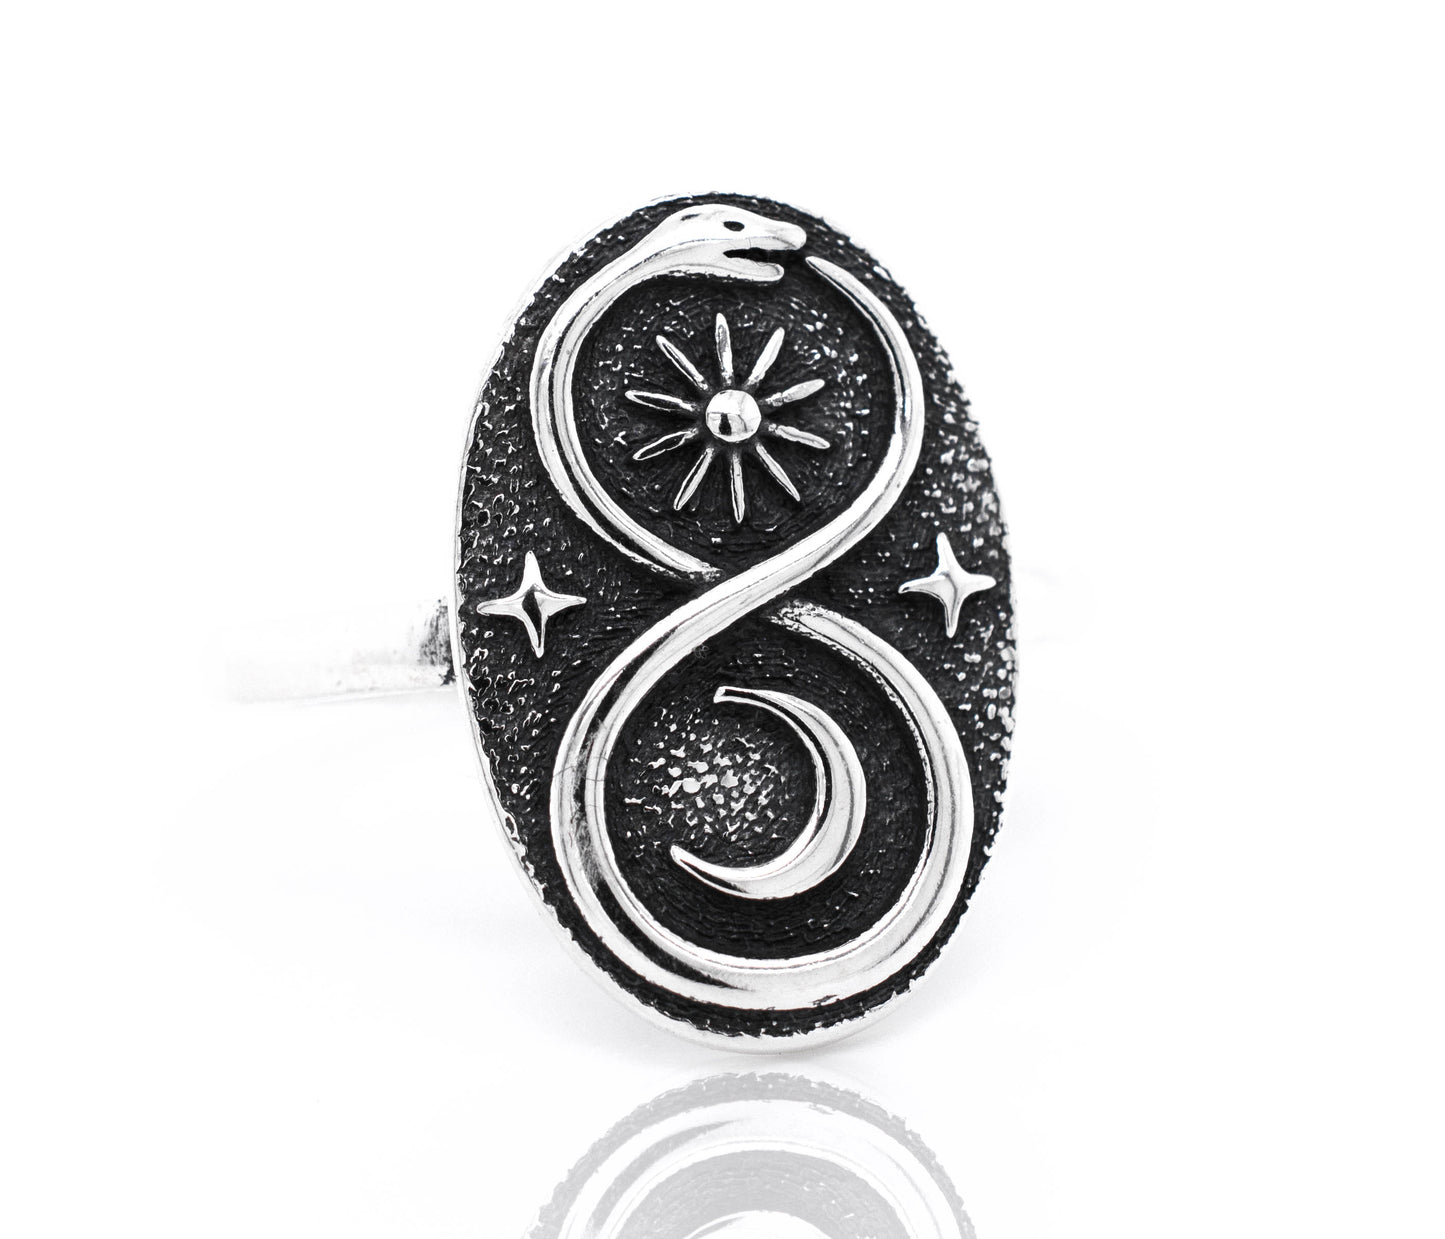 A Celestial Ouroboros Snake Ring by Super Silver, with an infinity symbol, representing symbolism.